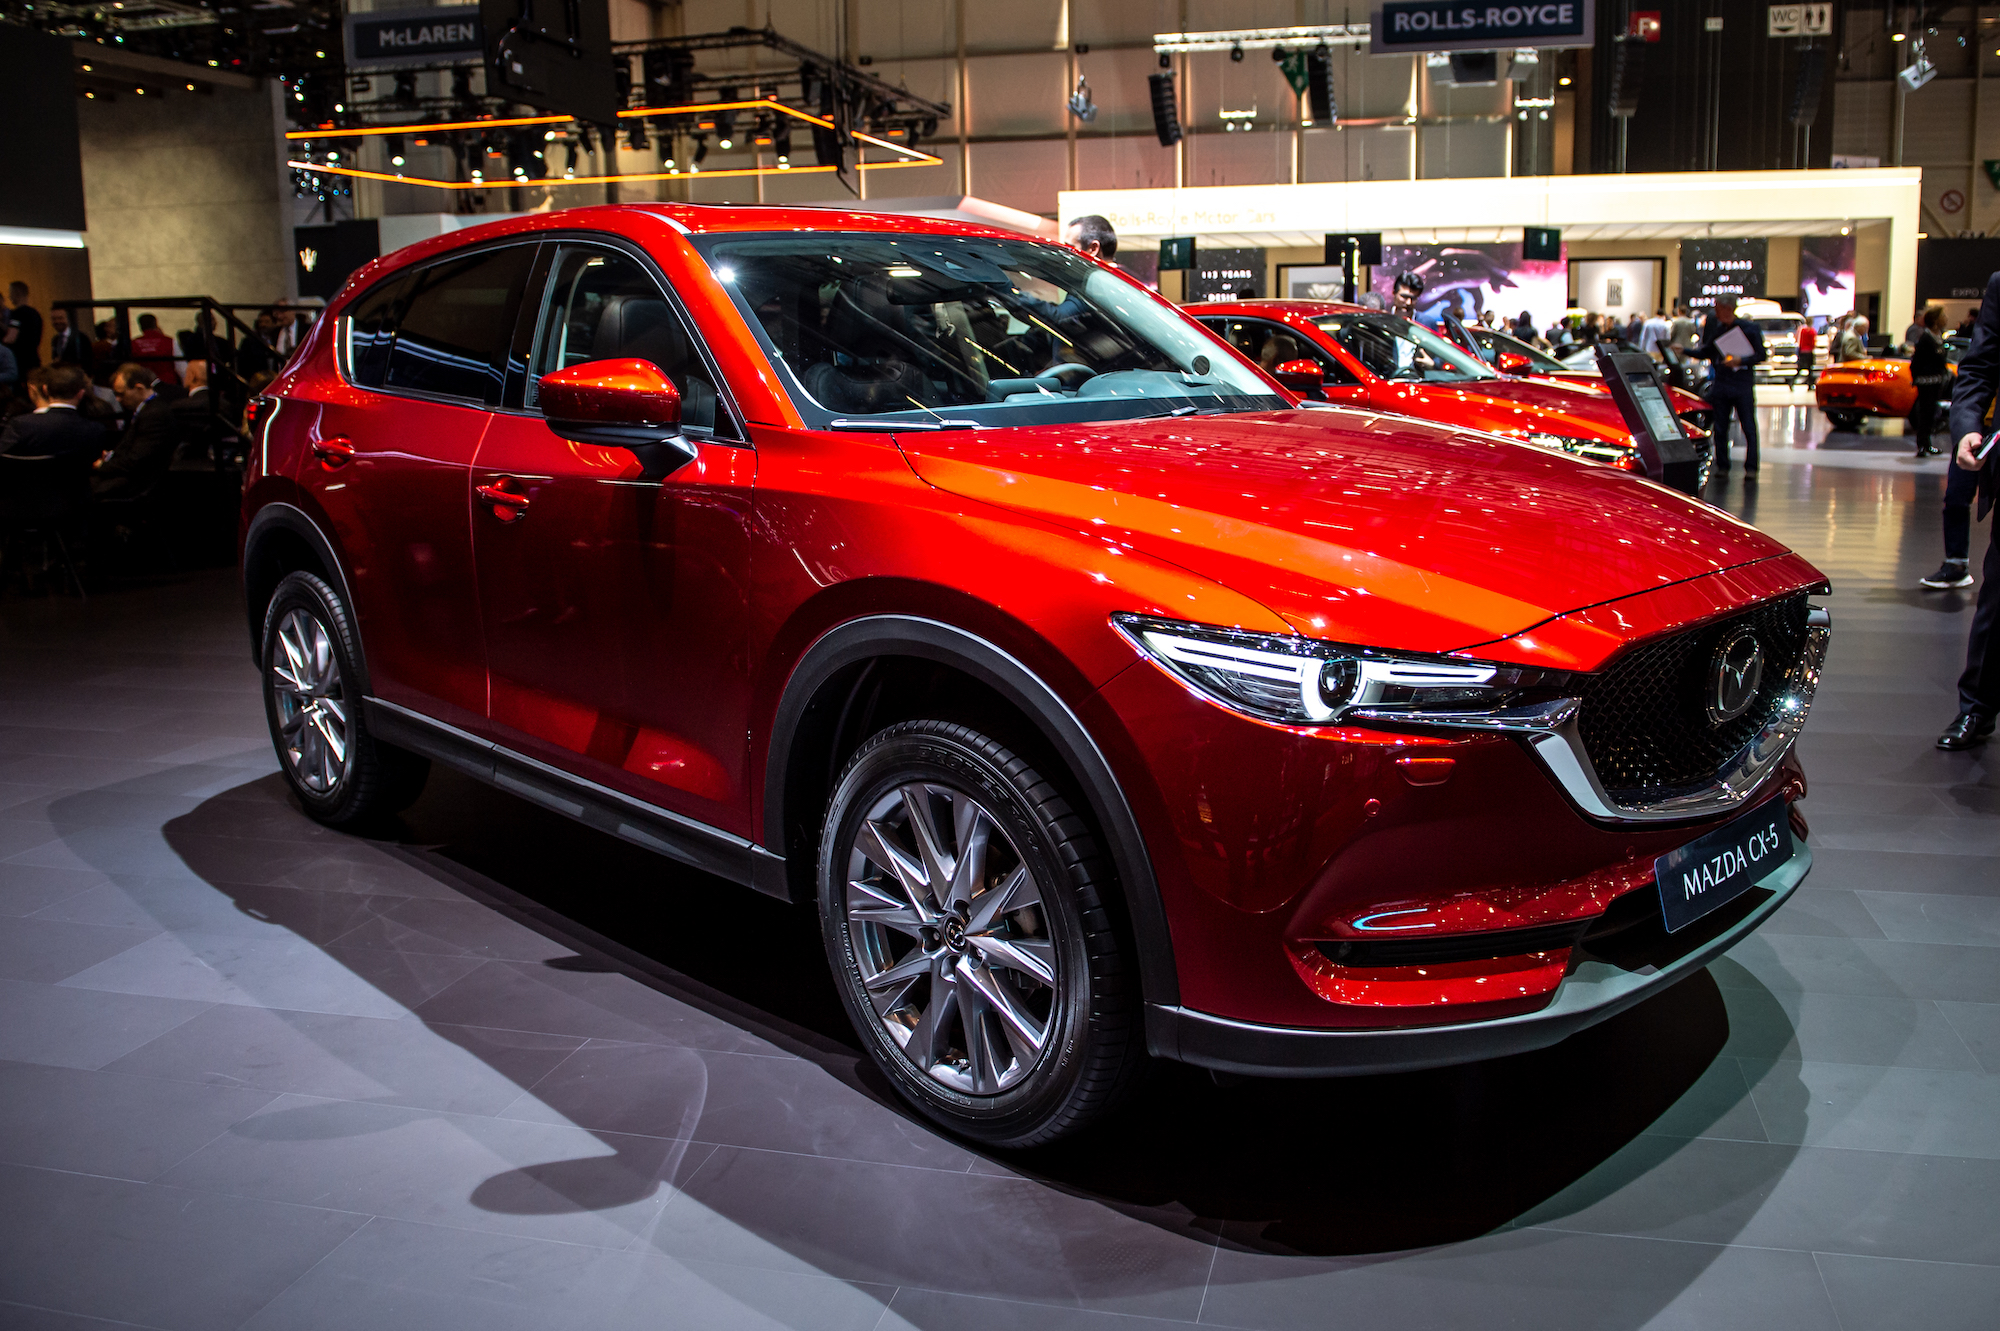 A red metallic 2019 Mazda CX-5 on display at the 89th Geneva International Motor Show on March 5, 2019